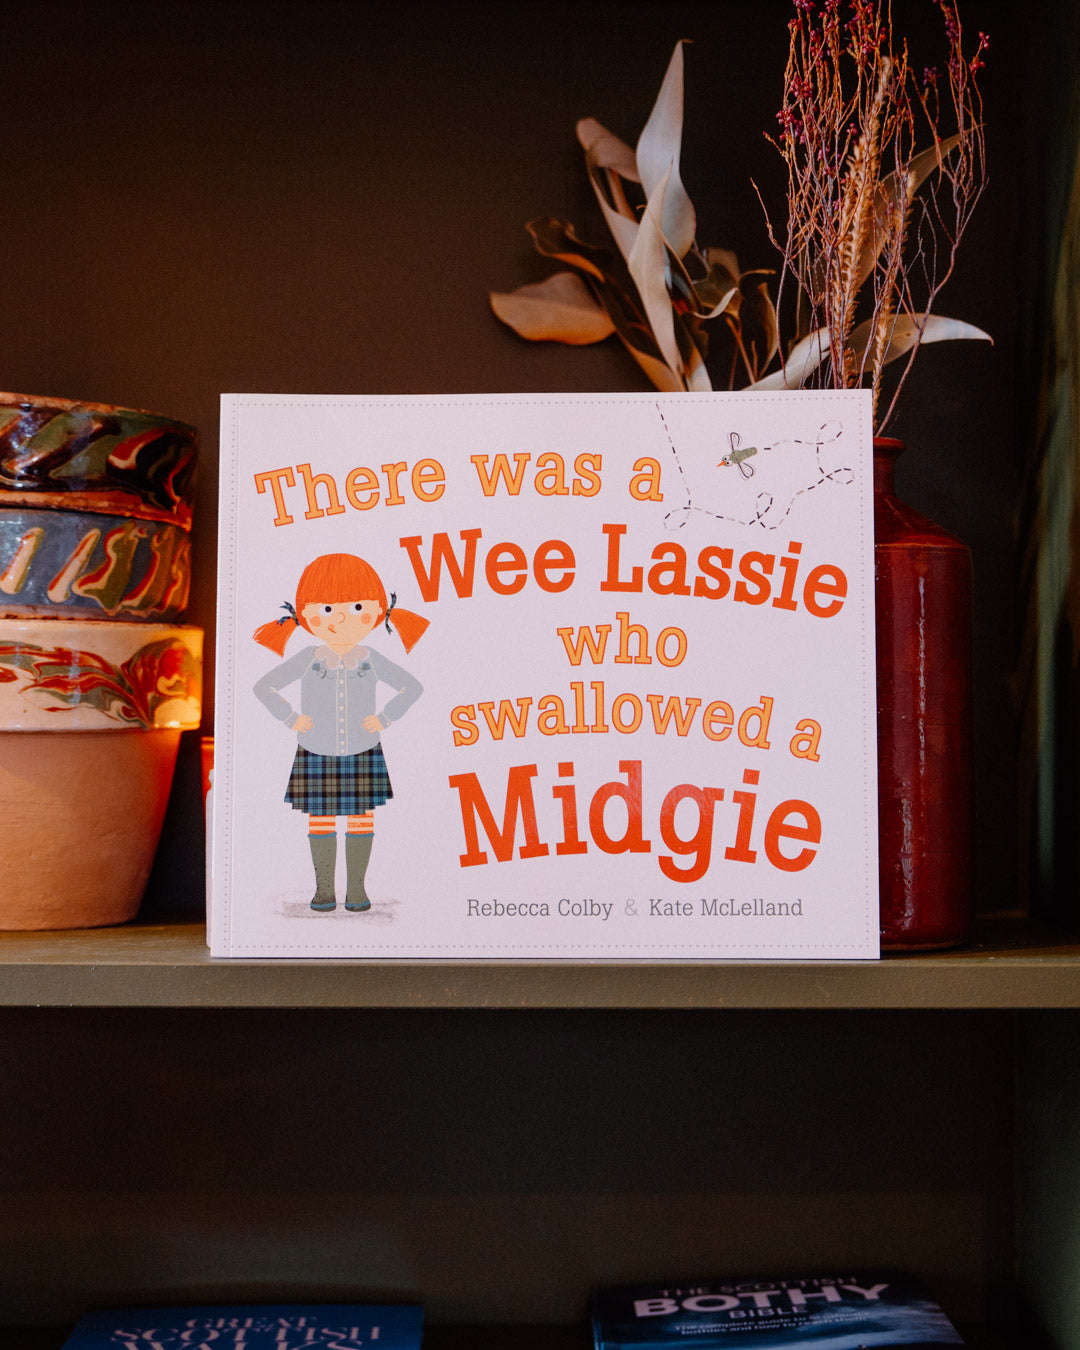 There was a wee lassie who swallowed a midgie